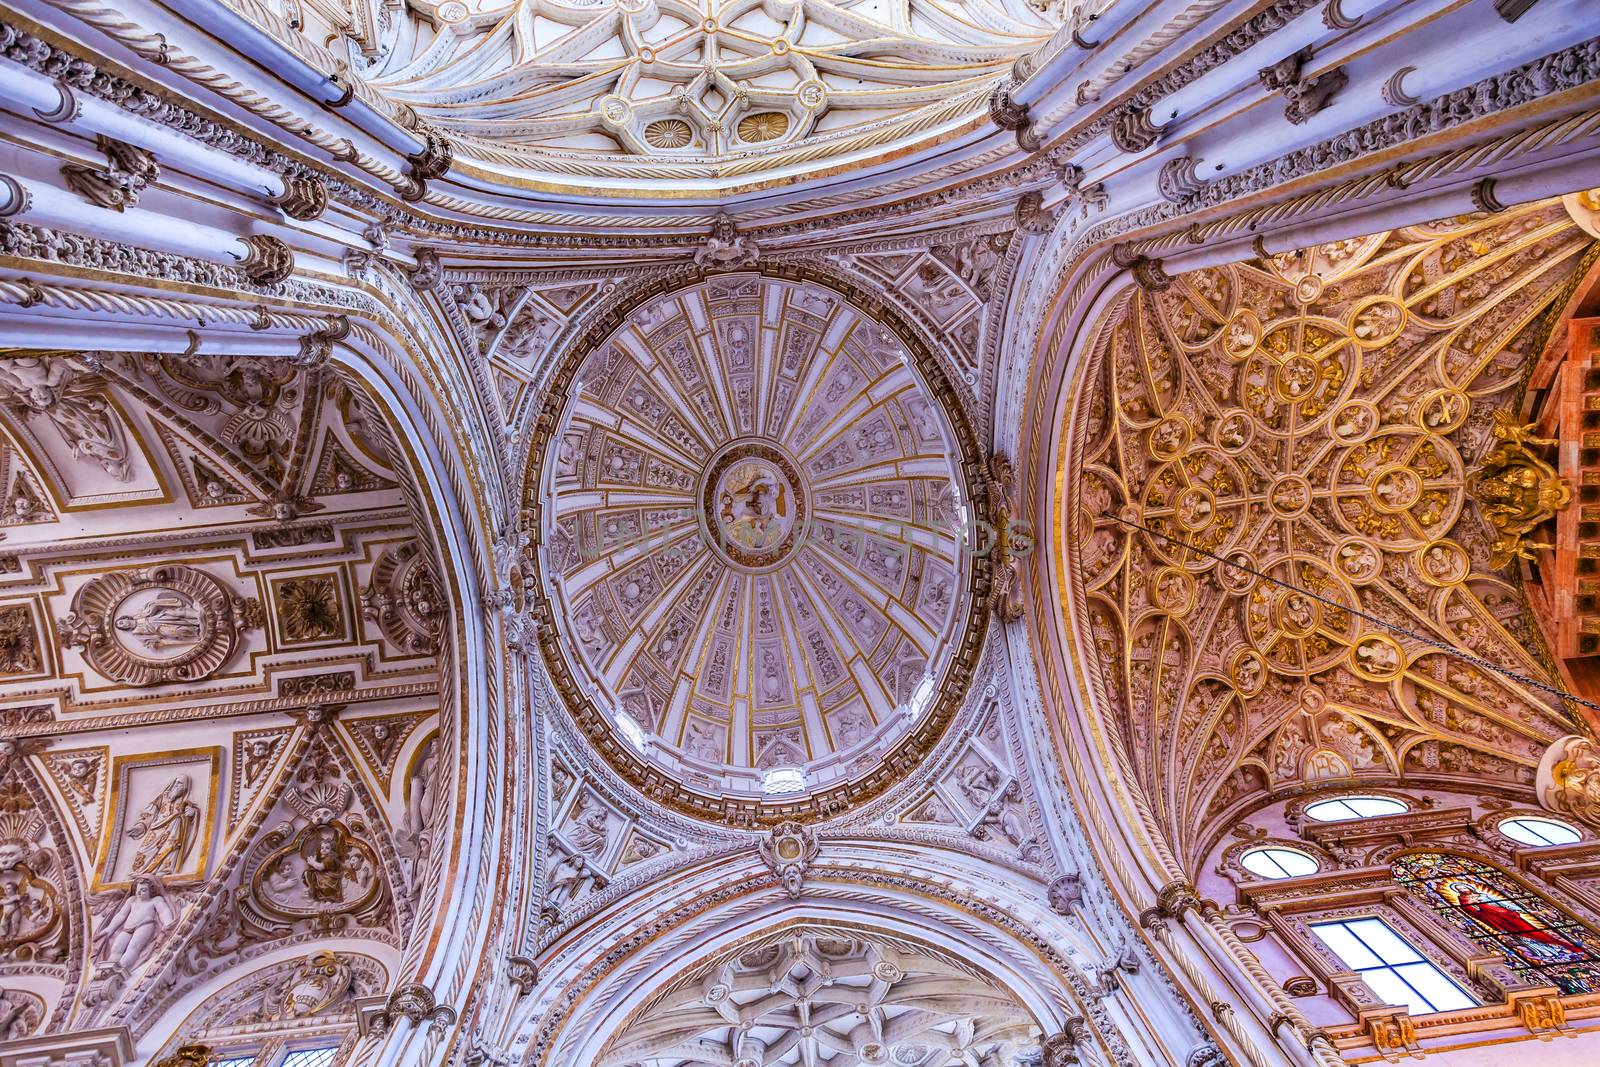 Cathedral White Ceiling Dome Mezquita Cordoba Spain.  Created in 785 as a Mosque, was converted to a Cathedral in the 1500.